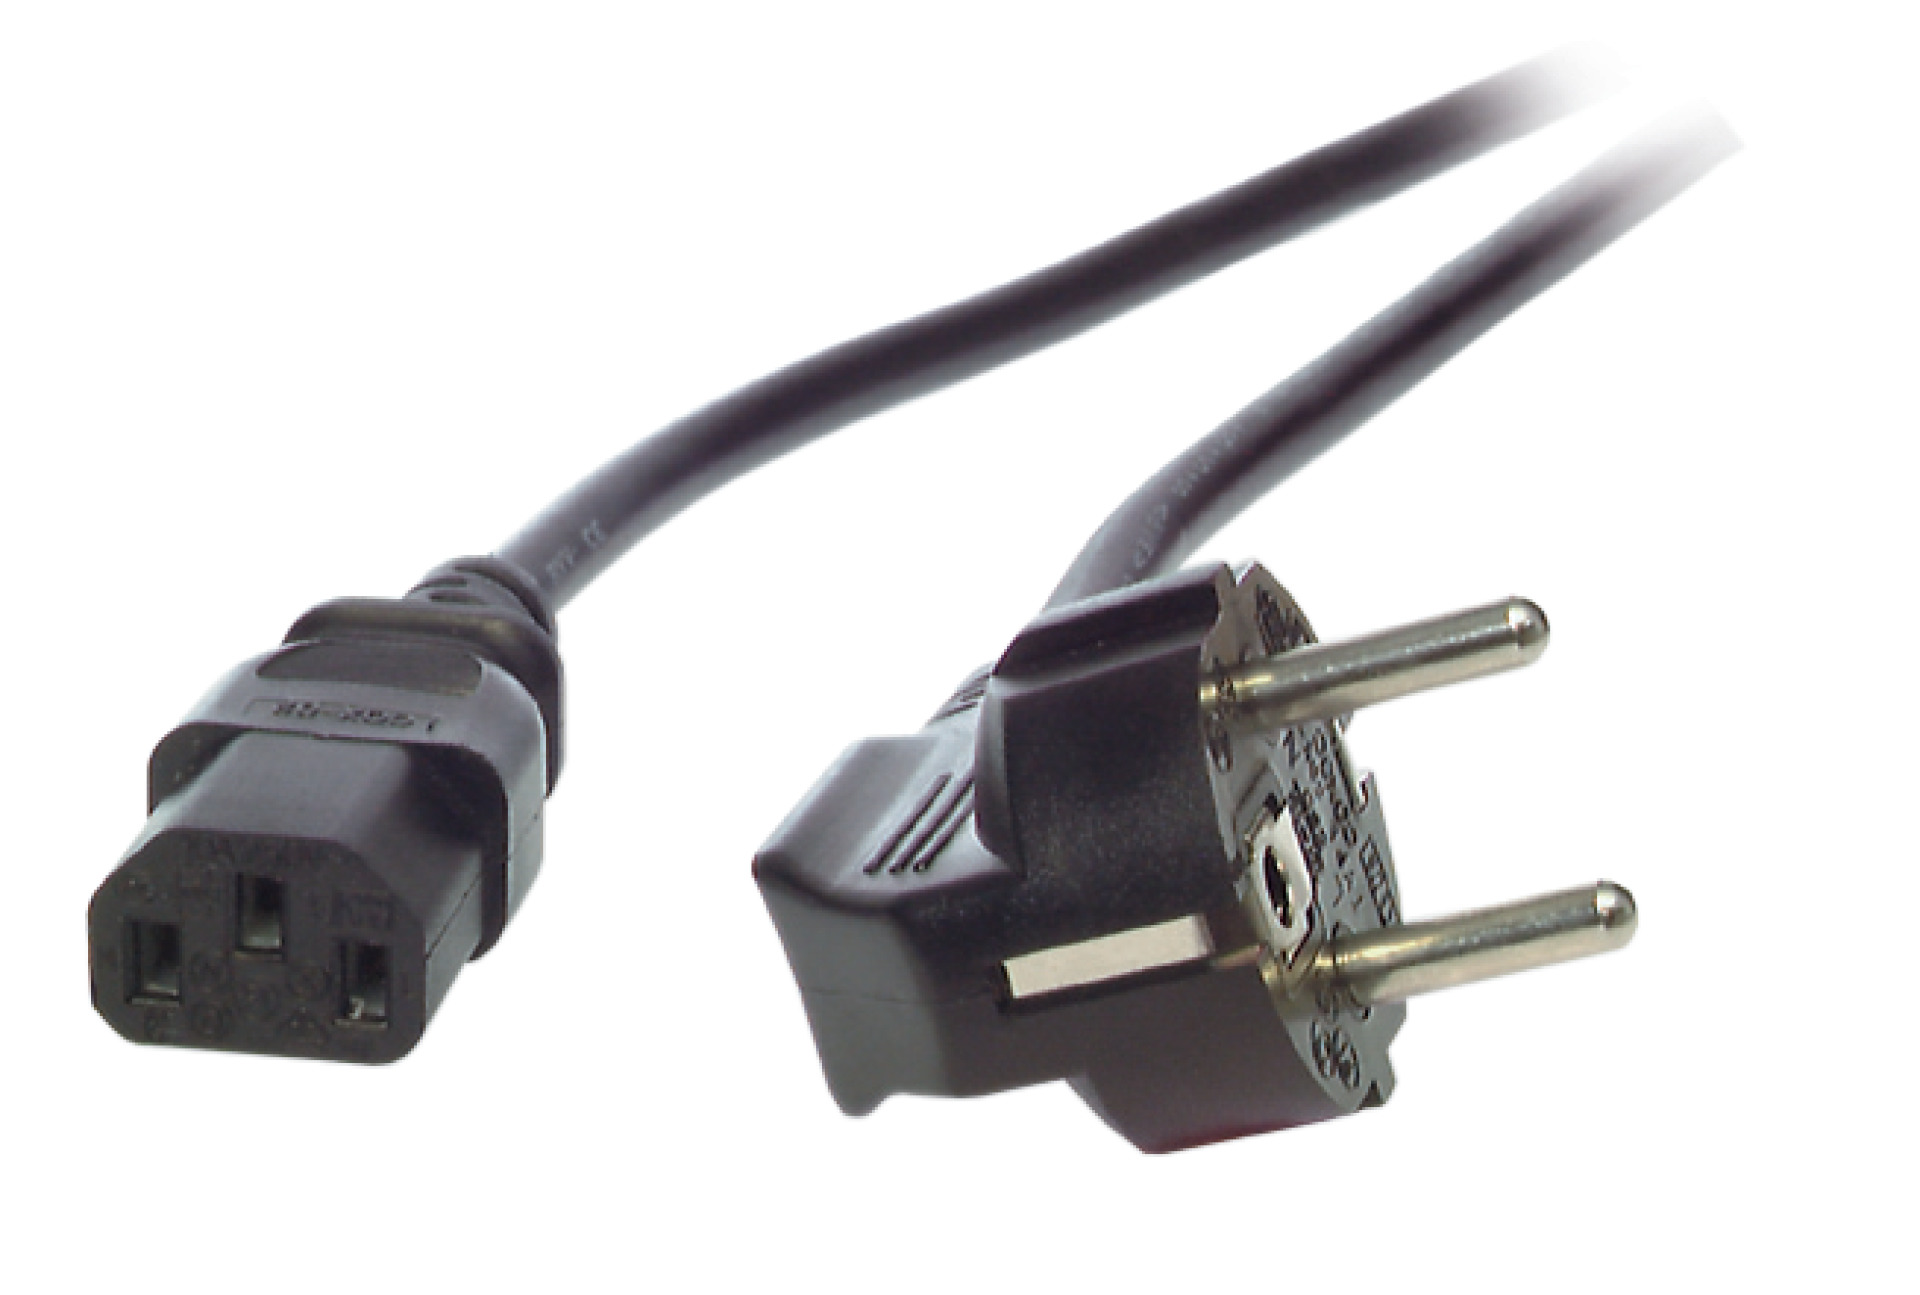 Power Cable CEE7/7 90° - C13 180°, Black 2.0 m, 3 x 0.75 mm²